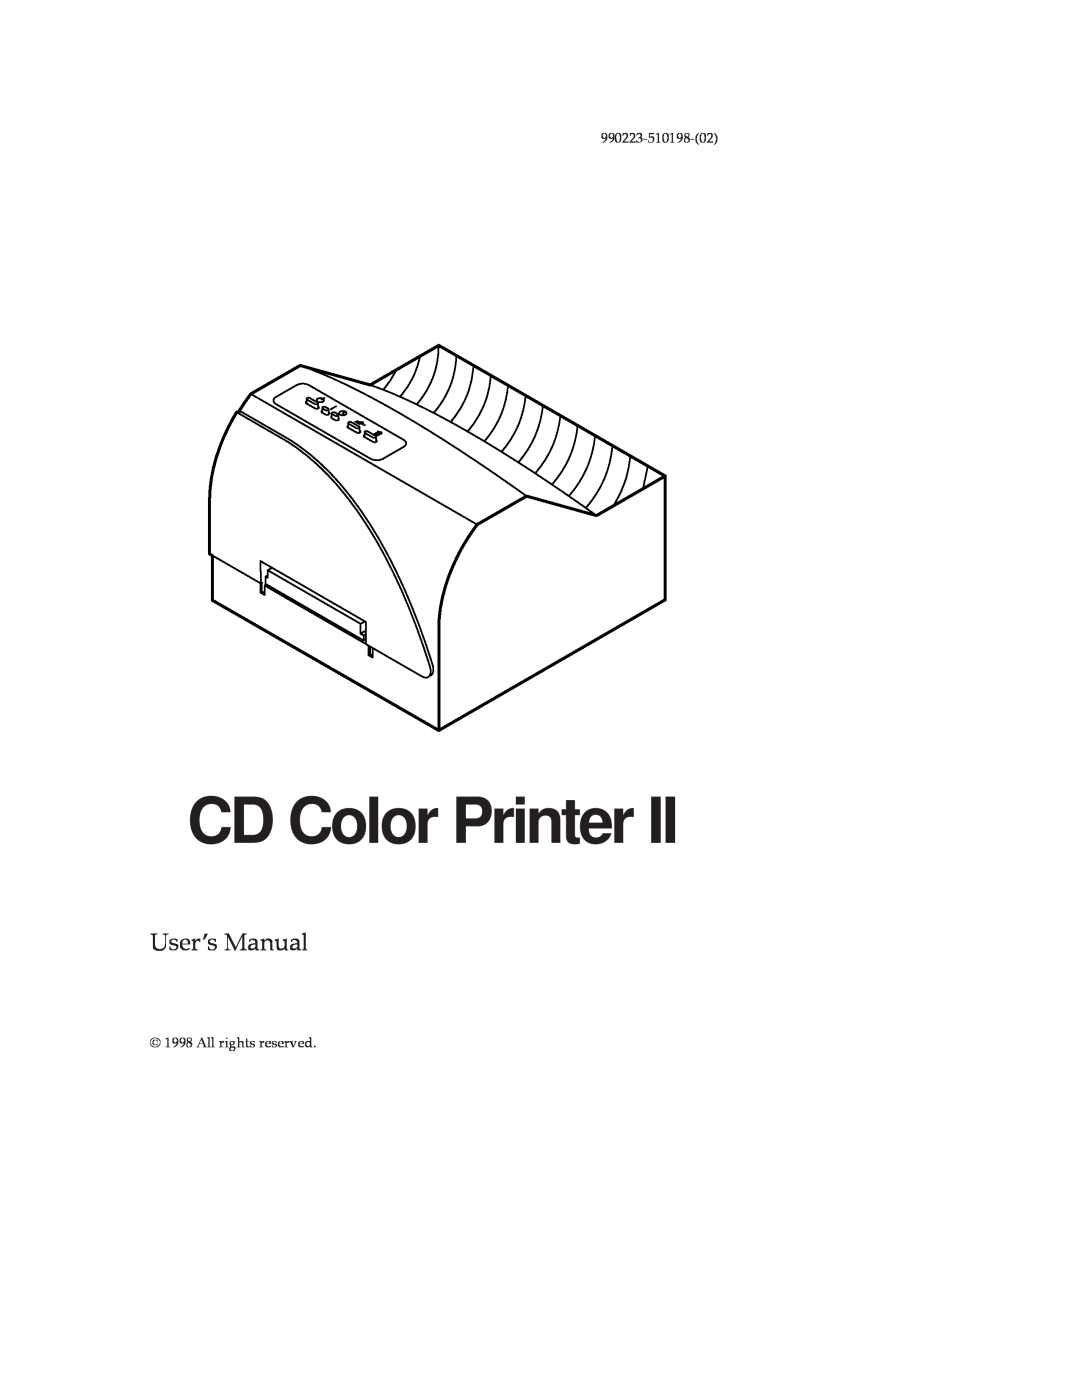 Primera Technology CD Color Printer II manual UserÕs Manual, 990223-510198-02, All rights reserved 